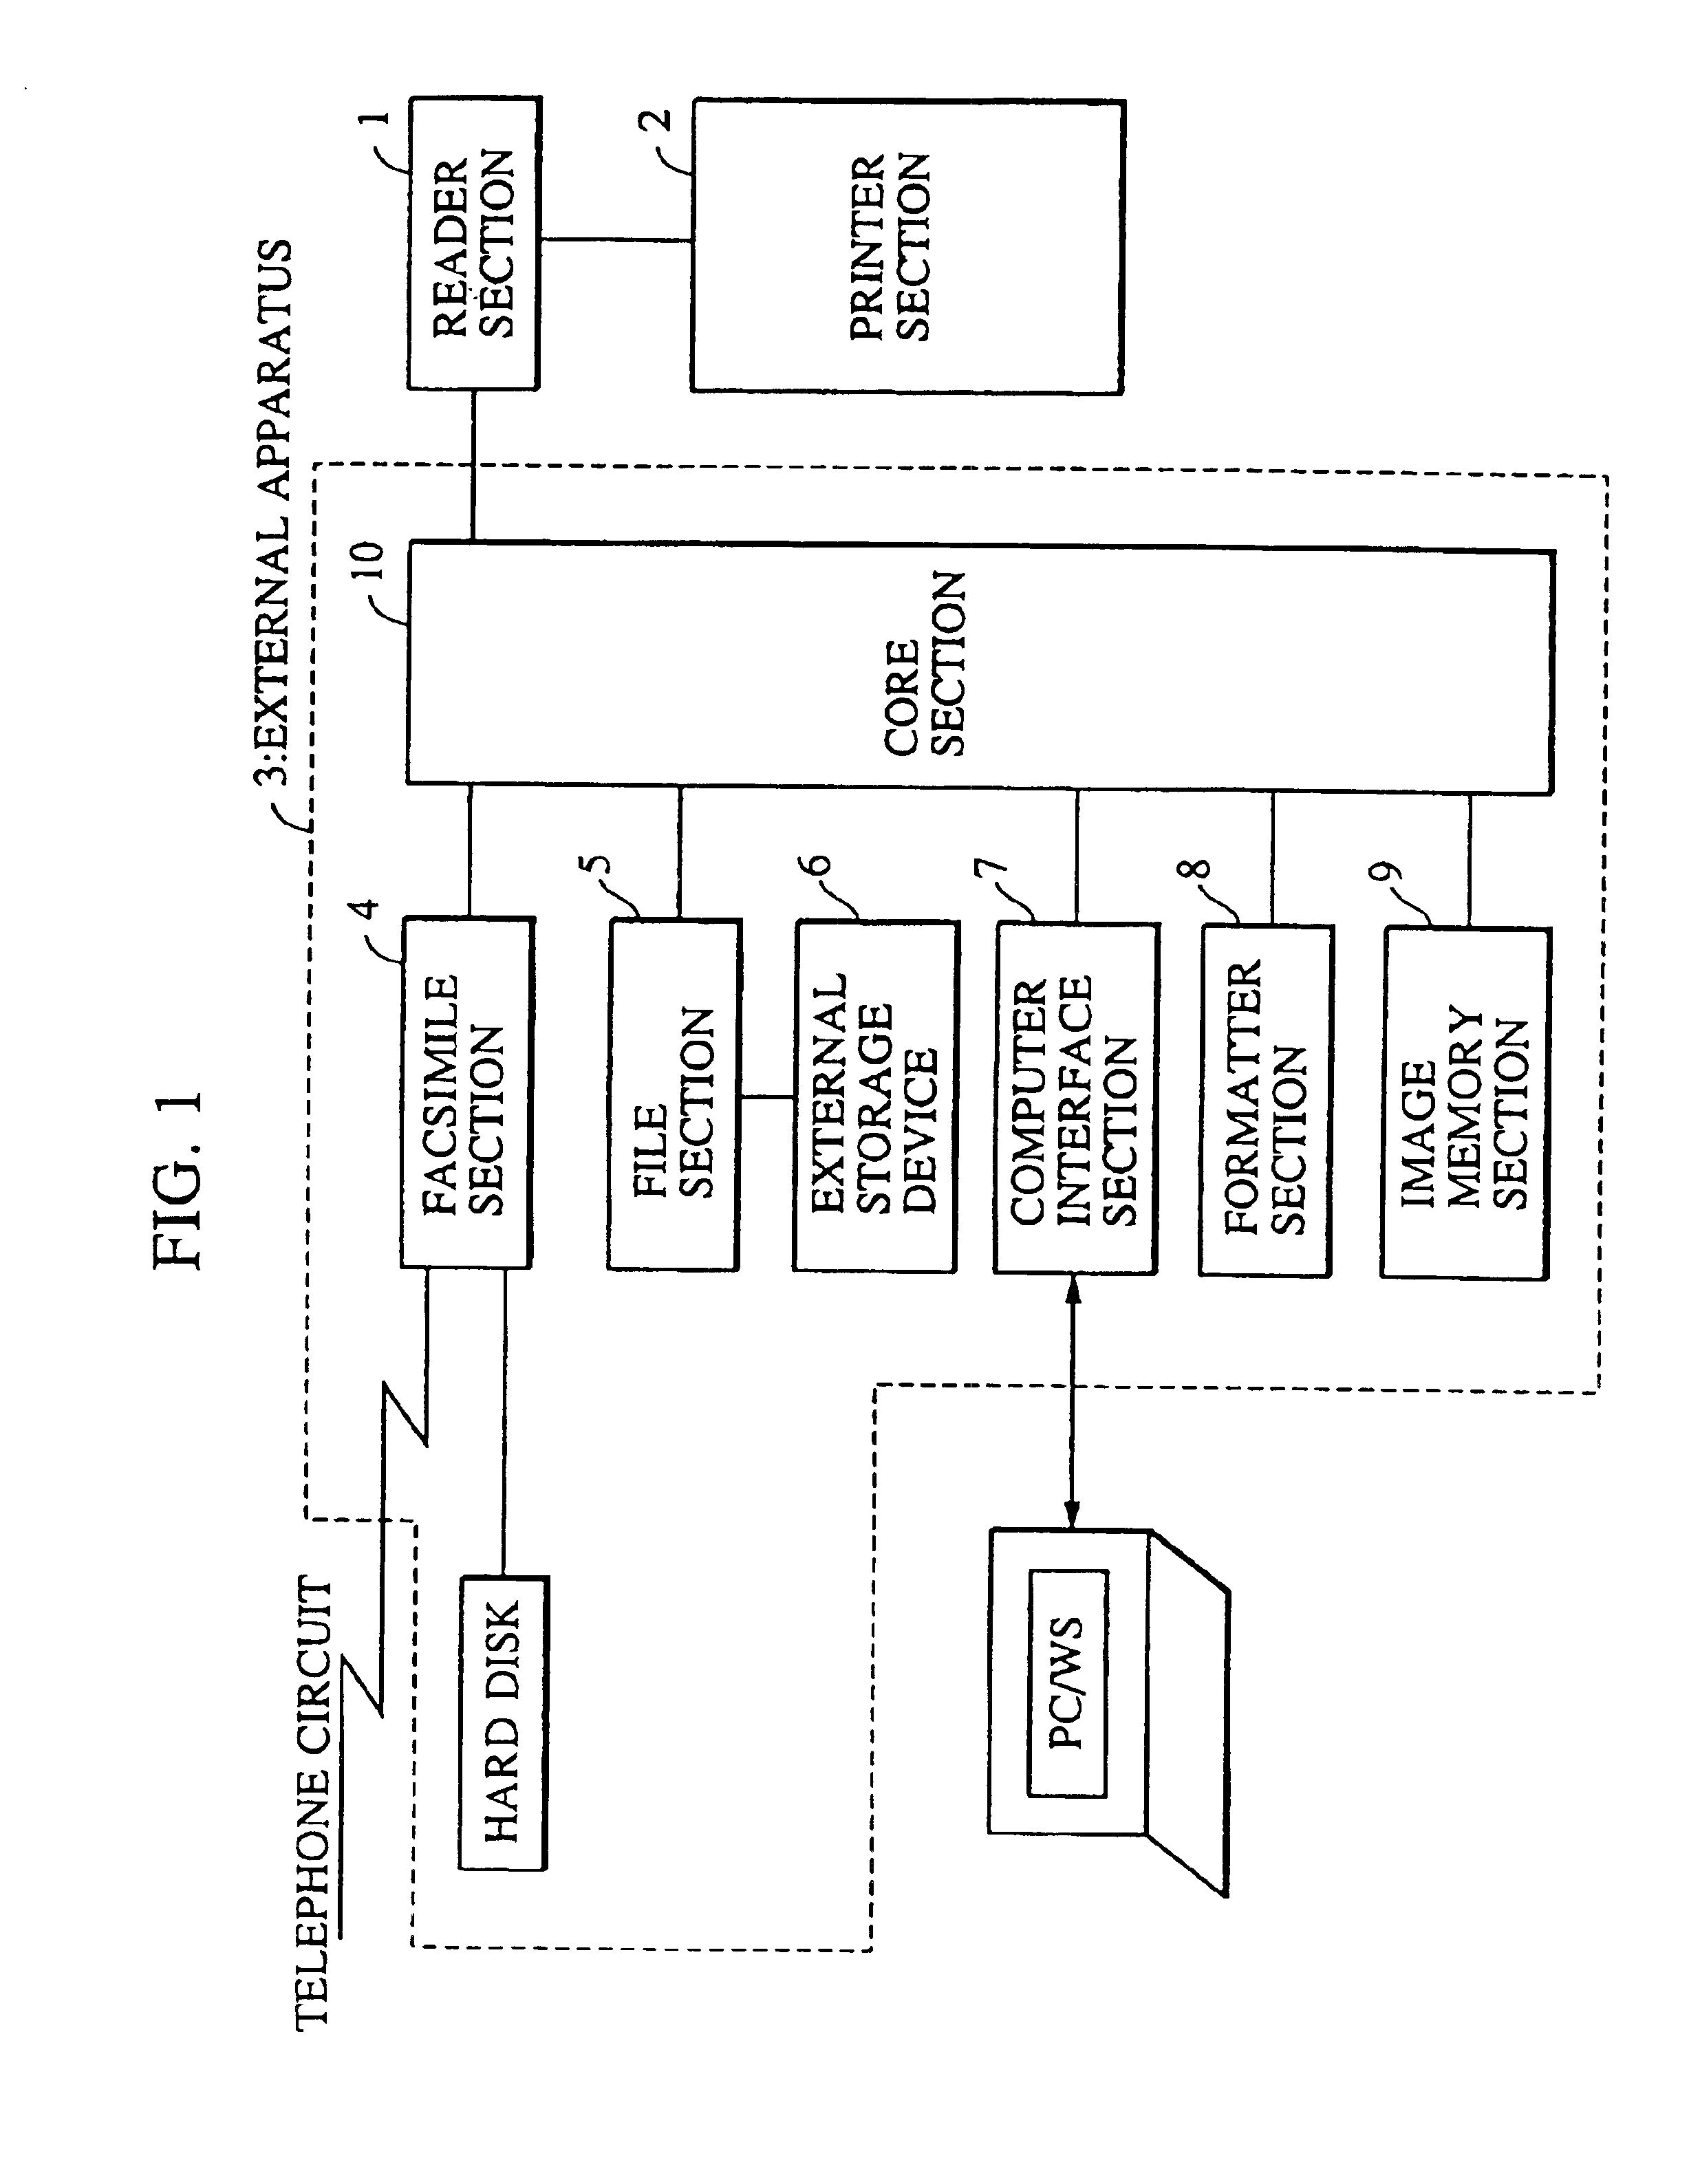 Printer with controller responsive to stored image files and processing information, related method, and recording media having related executable code